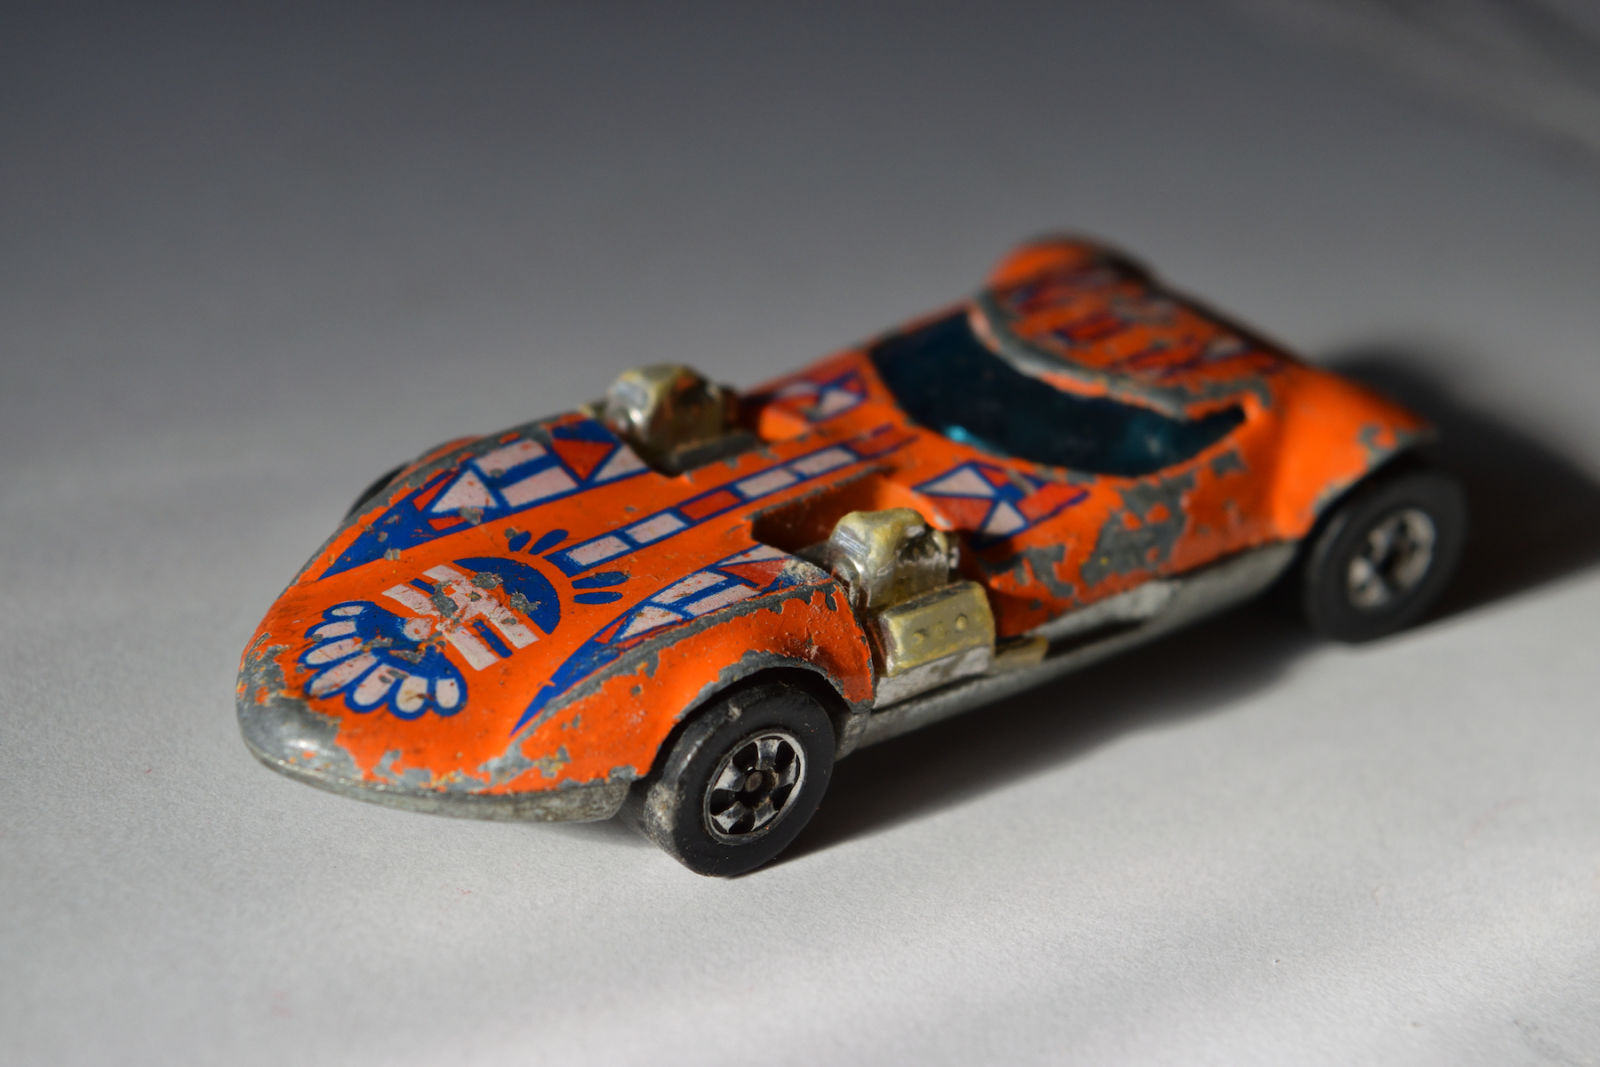 Illustration for article titled Found my old hotwheels/matchbox cars